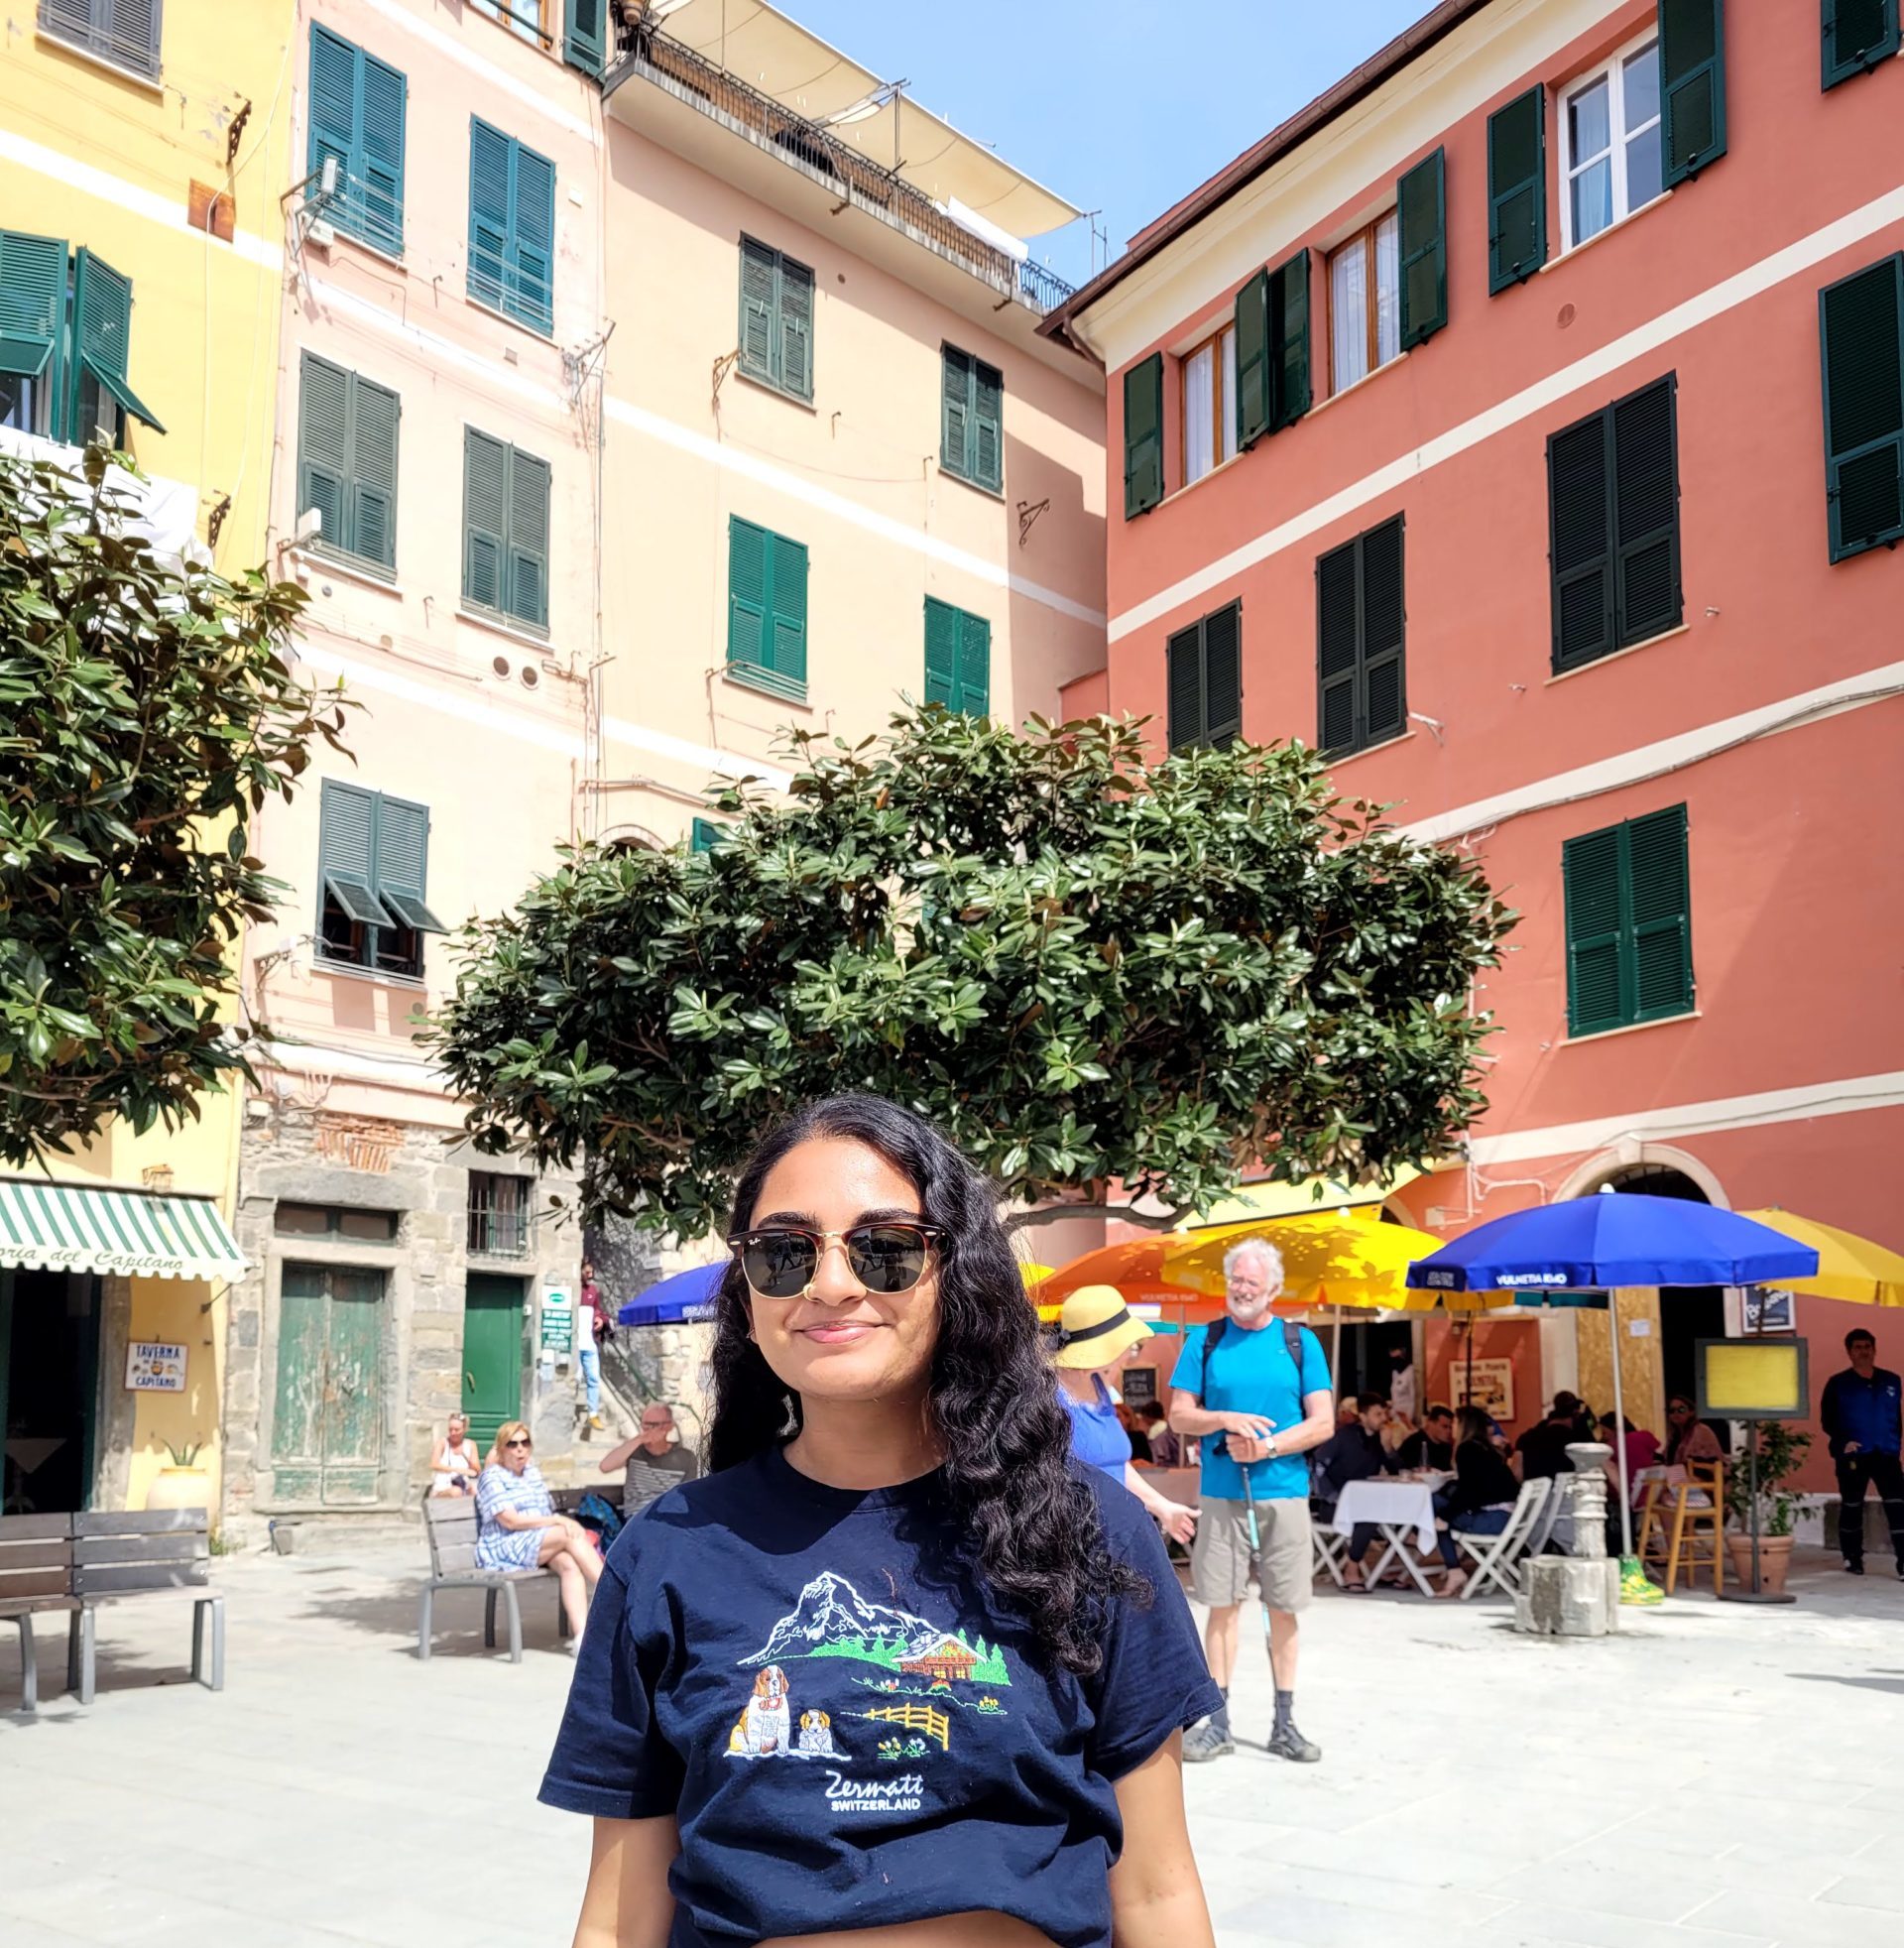 Eshika in front of the colorful buildings in Cinque Terre.